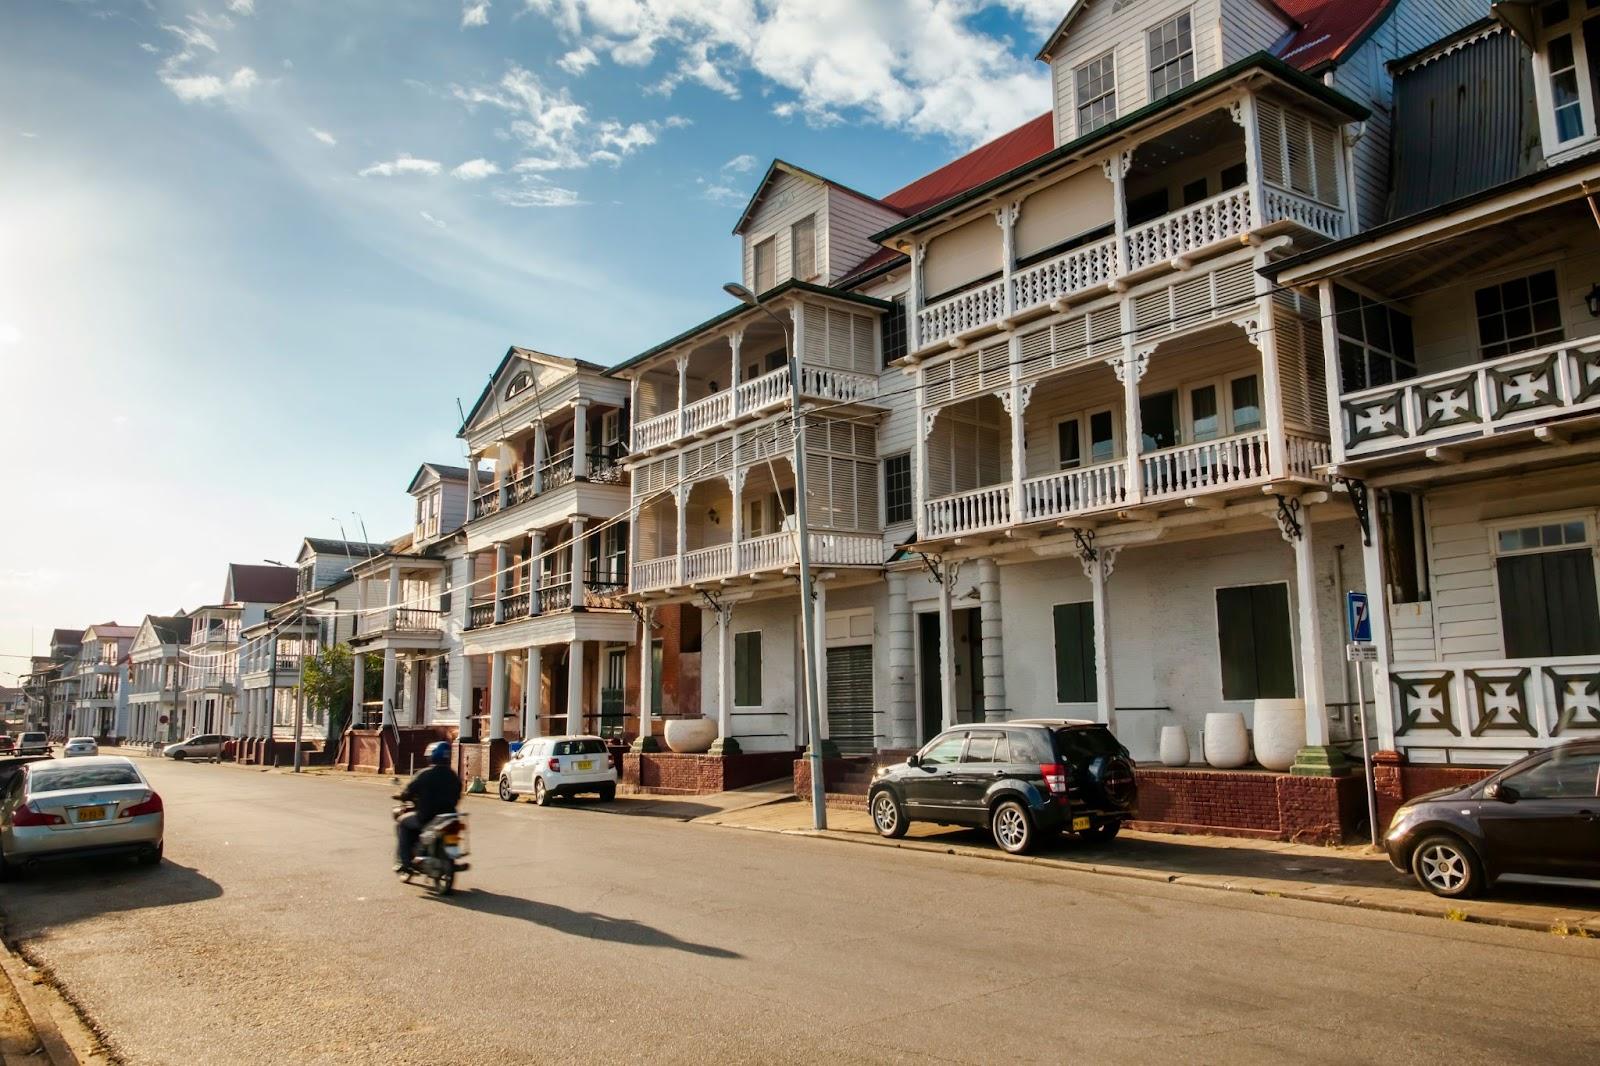 PARAMARIBO, SURINAME. Old colonial buildings on Waterkant or Waterside street in the evening sun